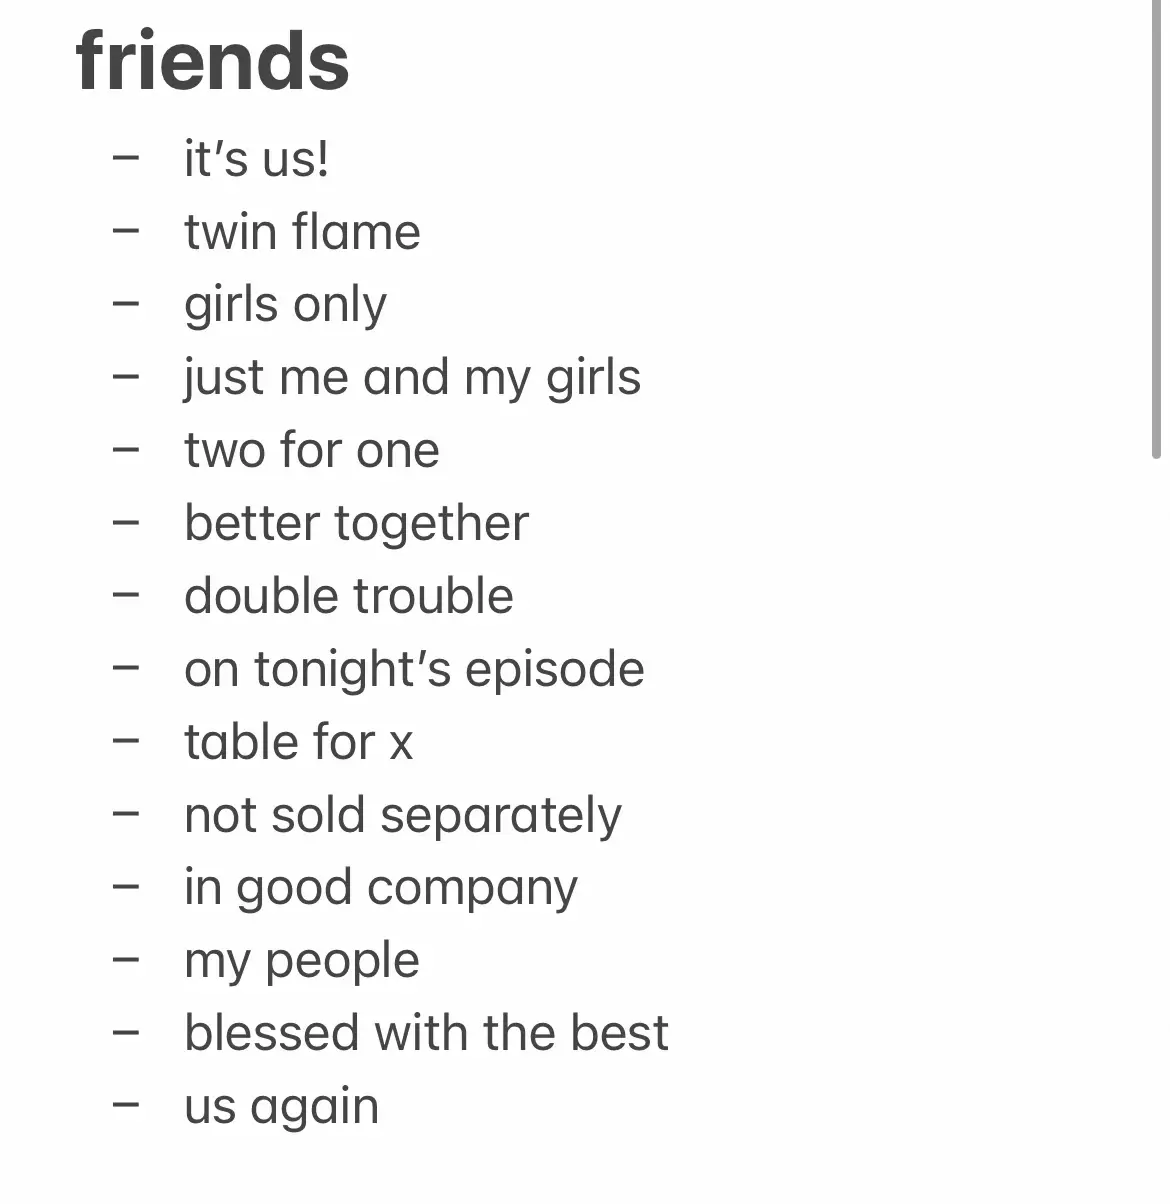  A list of friends with a